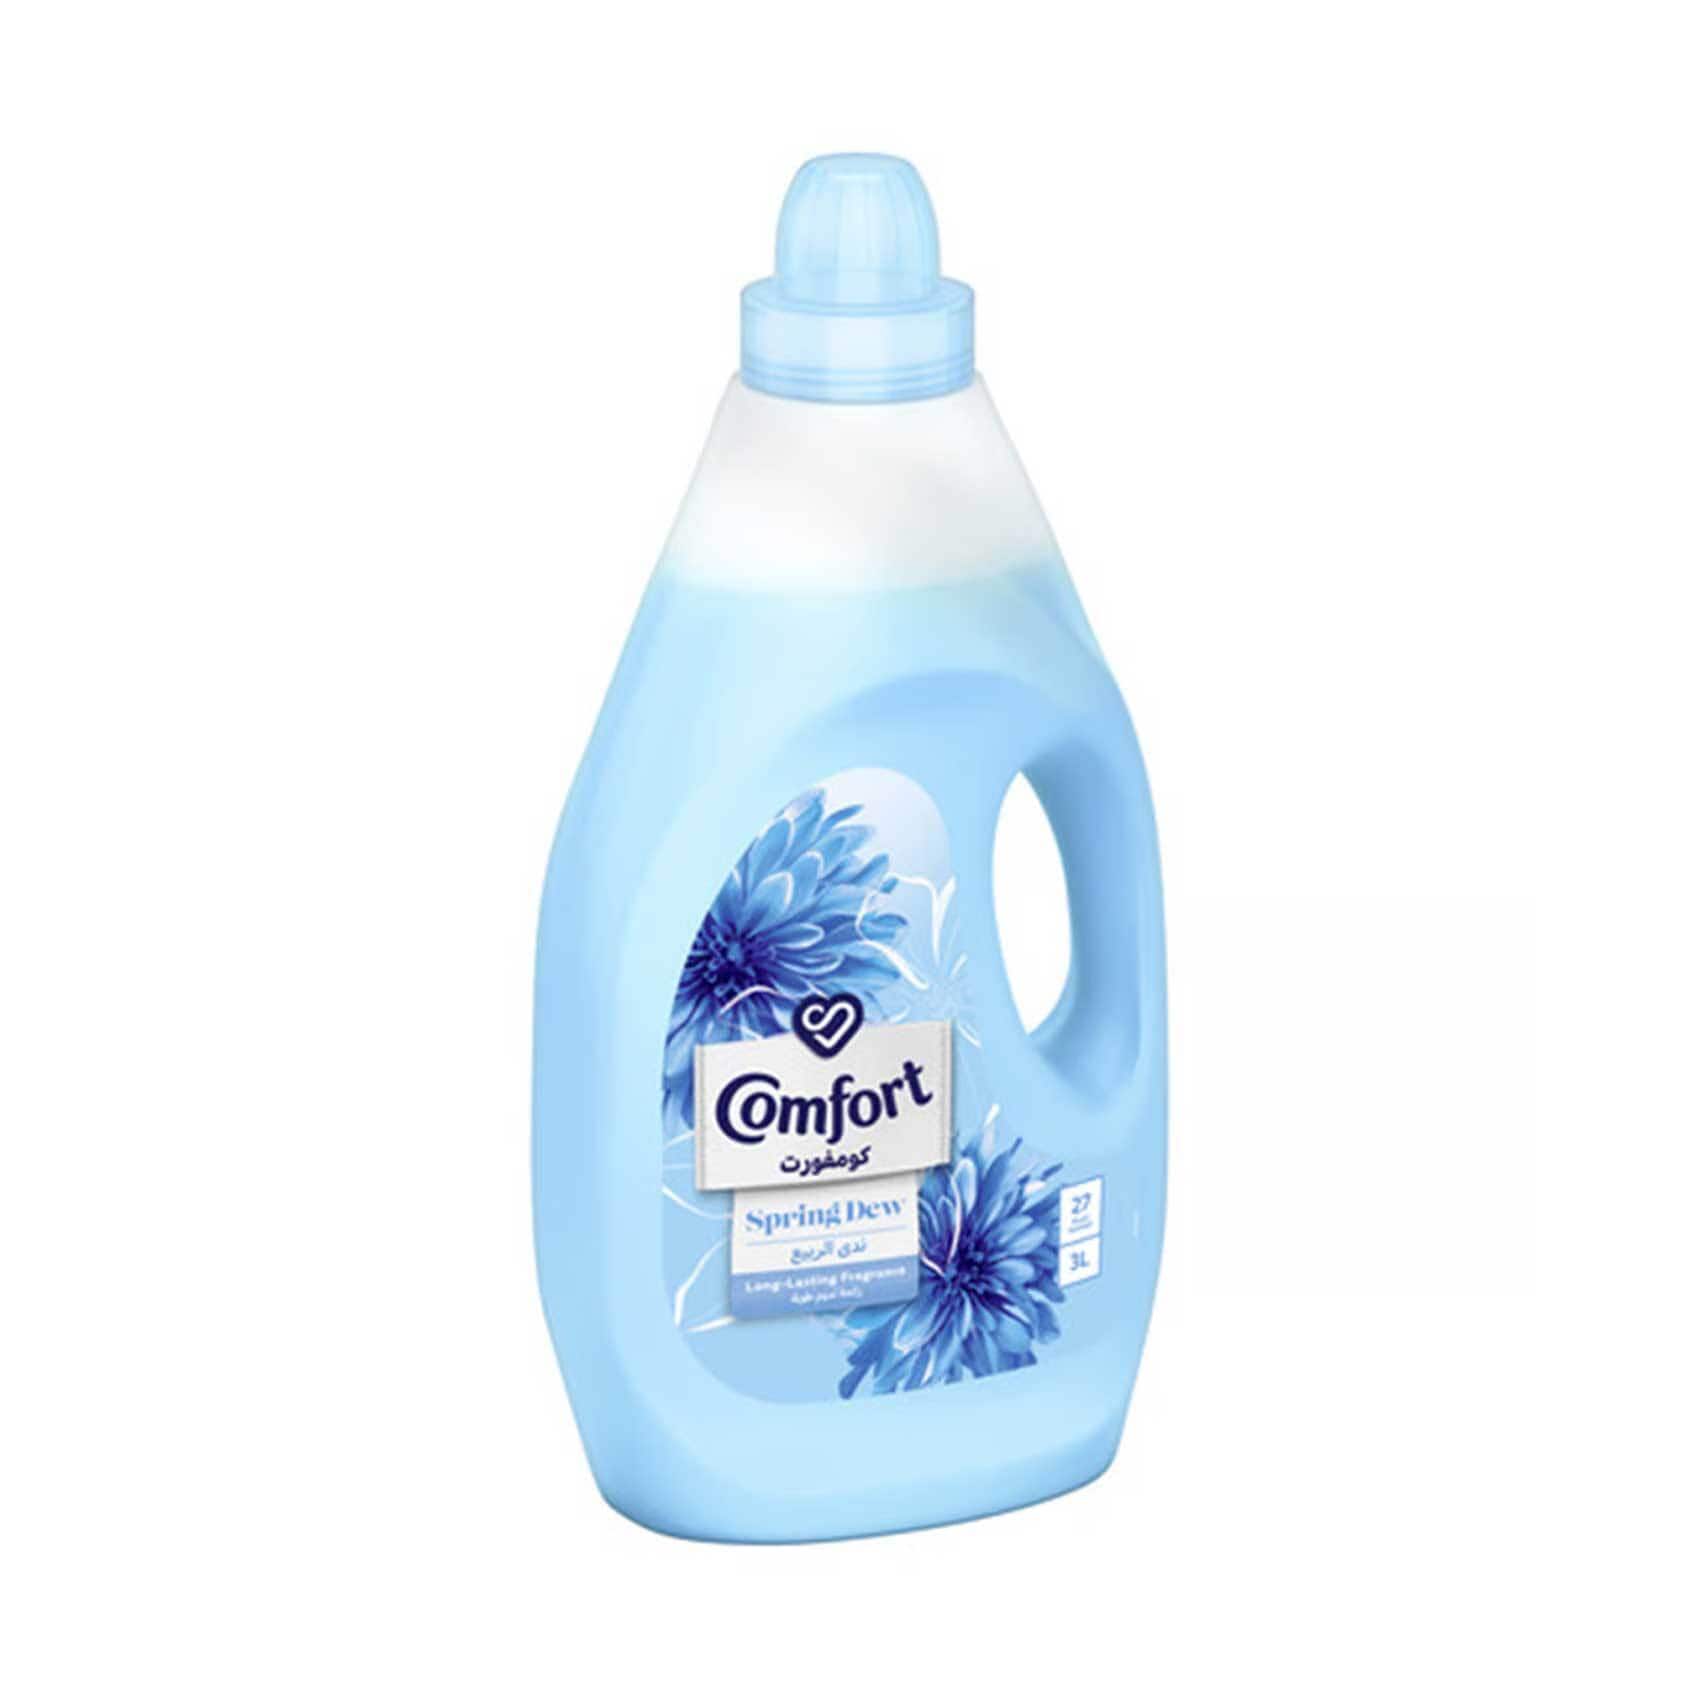 Comfort Ultimate Care Concentrated Fabric Softener Iris & Jasmine 2 x  1Litre Online at Best Price, Fabric softener concentrate